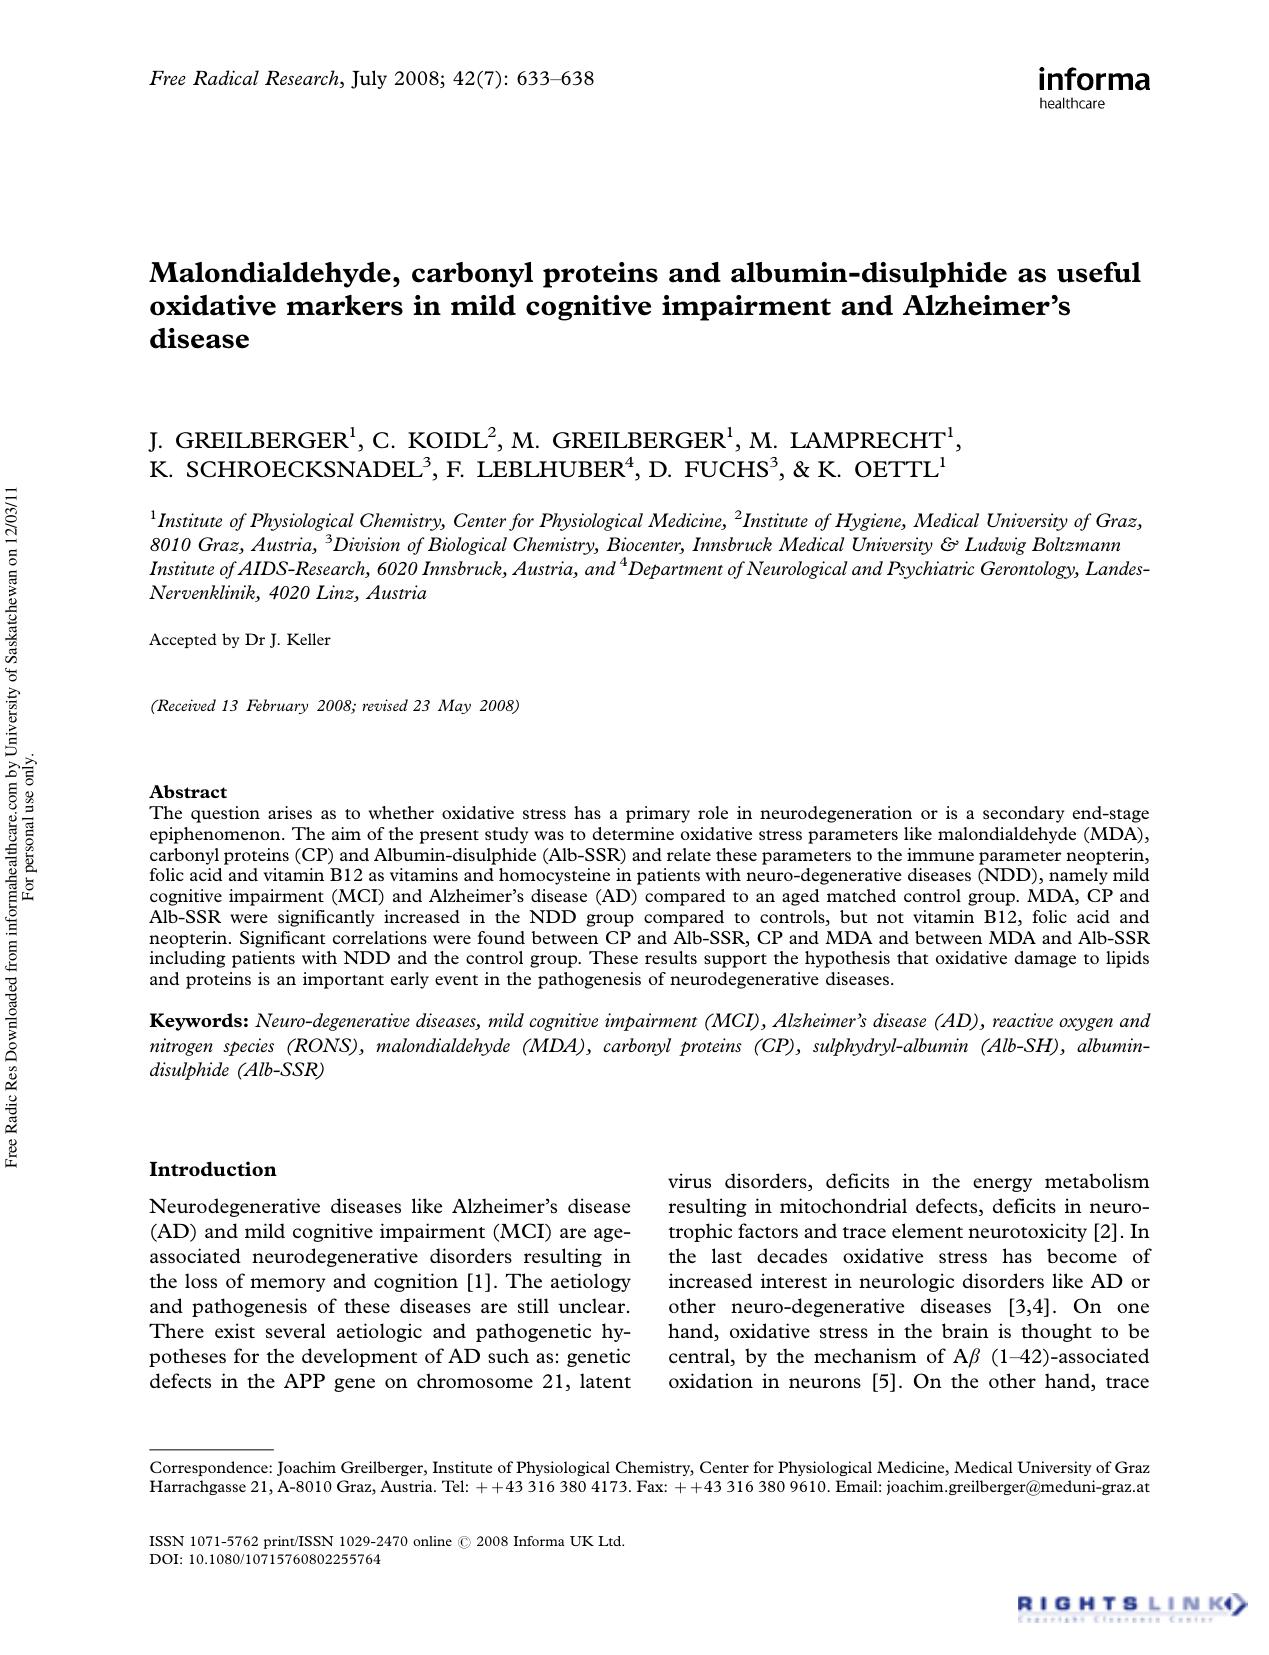 Malondialdehyde, carbonyl proteins and albumin-disulphide as useful oxidative markers in mild cognitive impairment and Alzheimer's disease by unknow